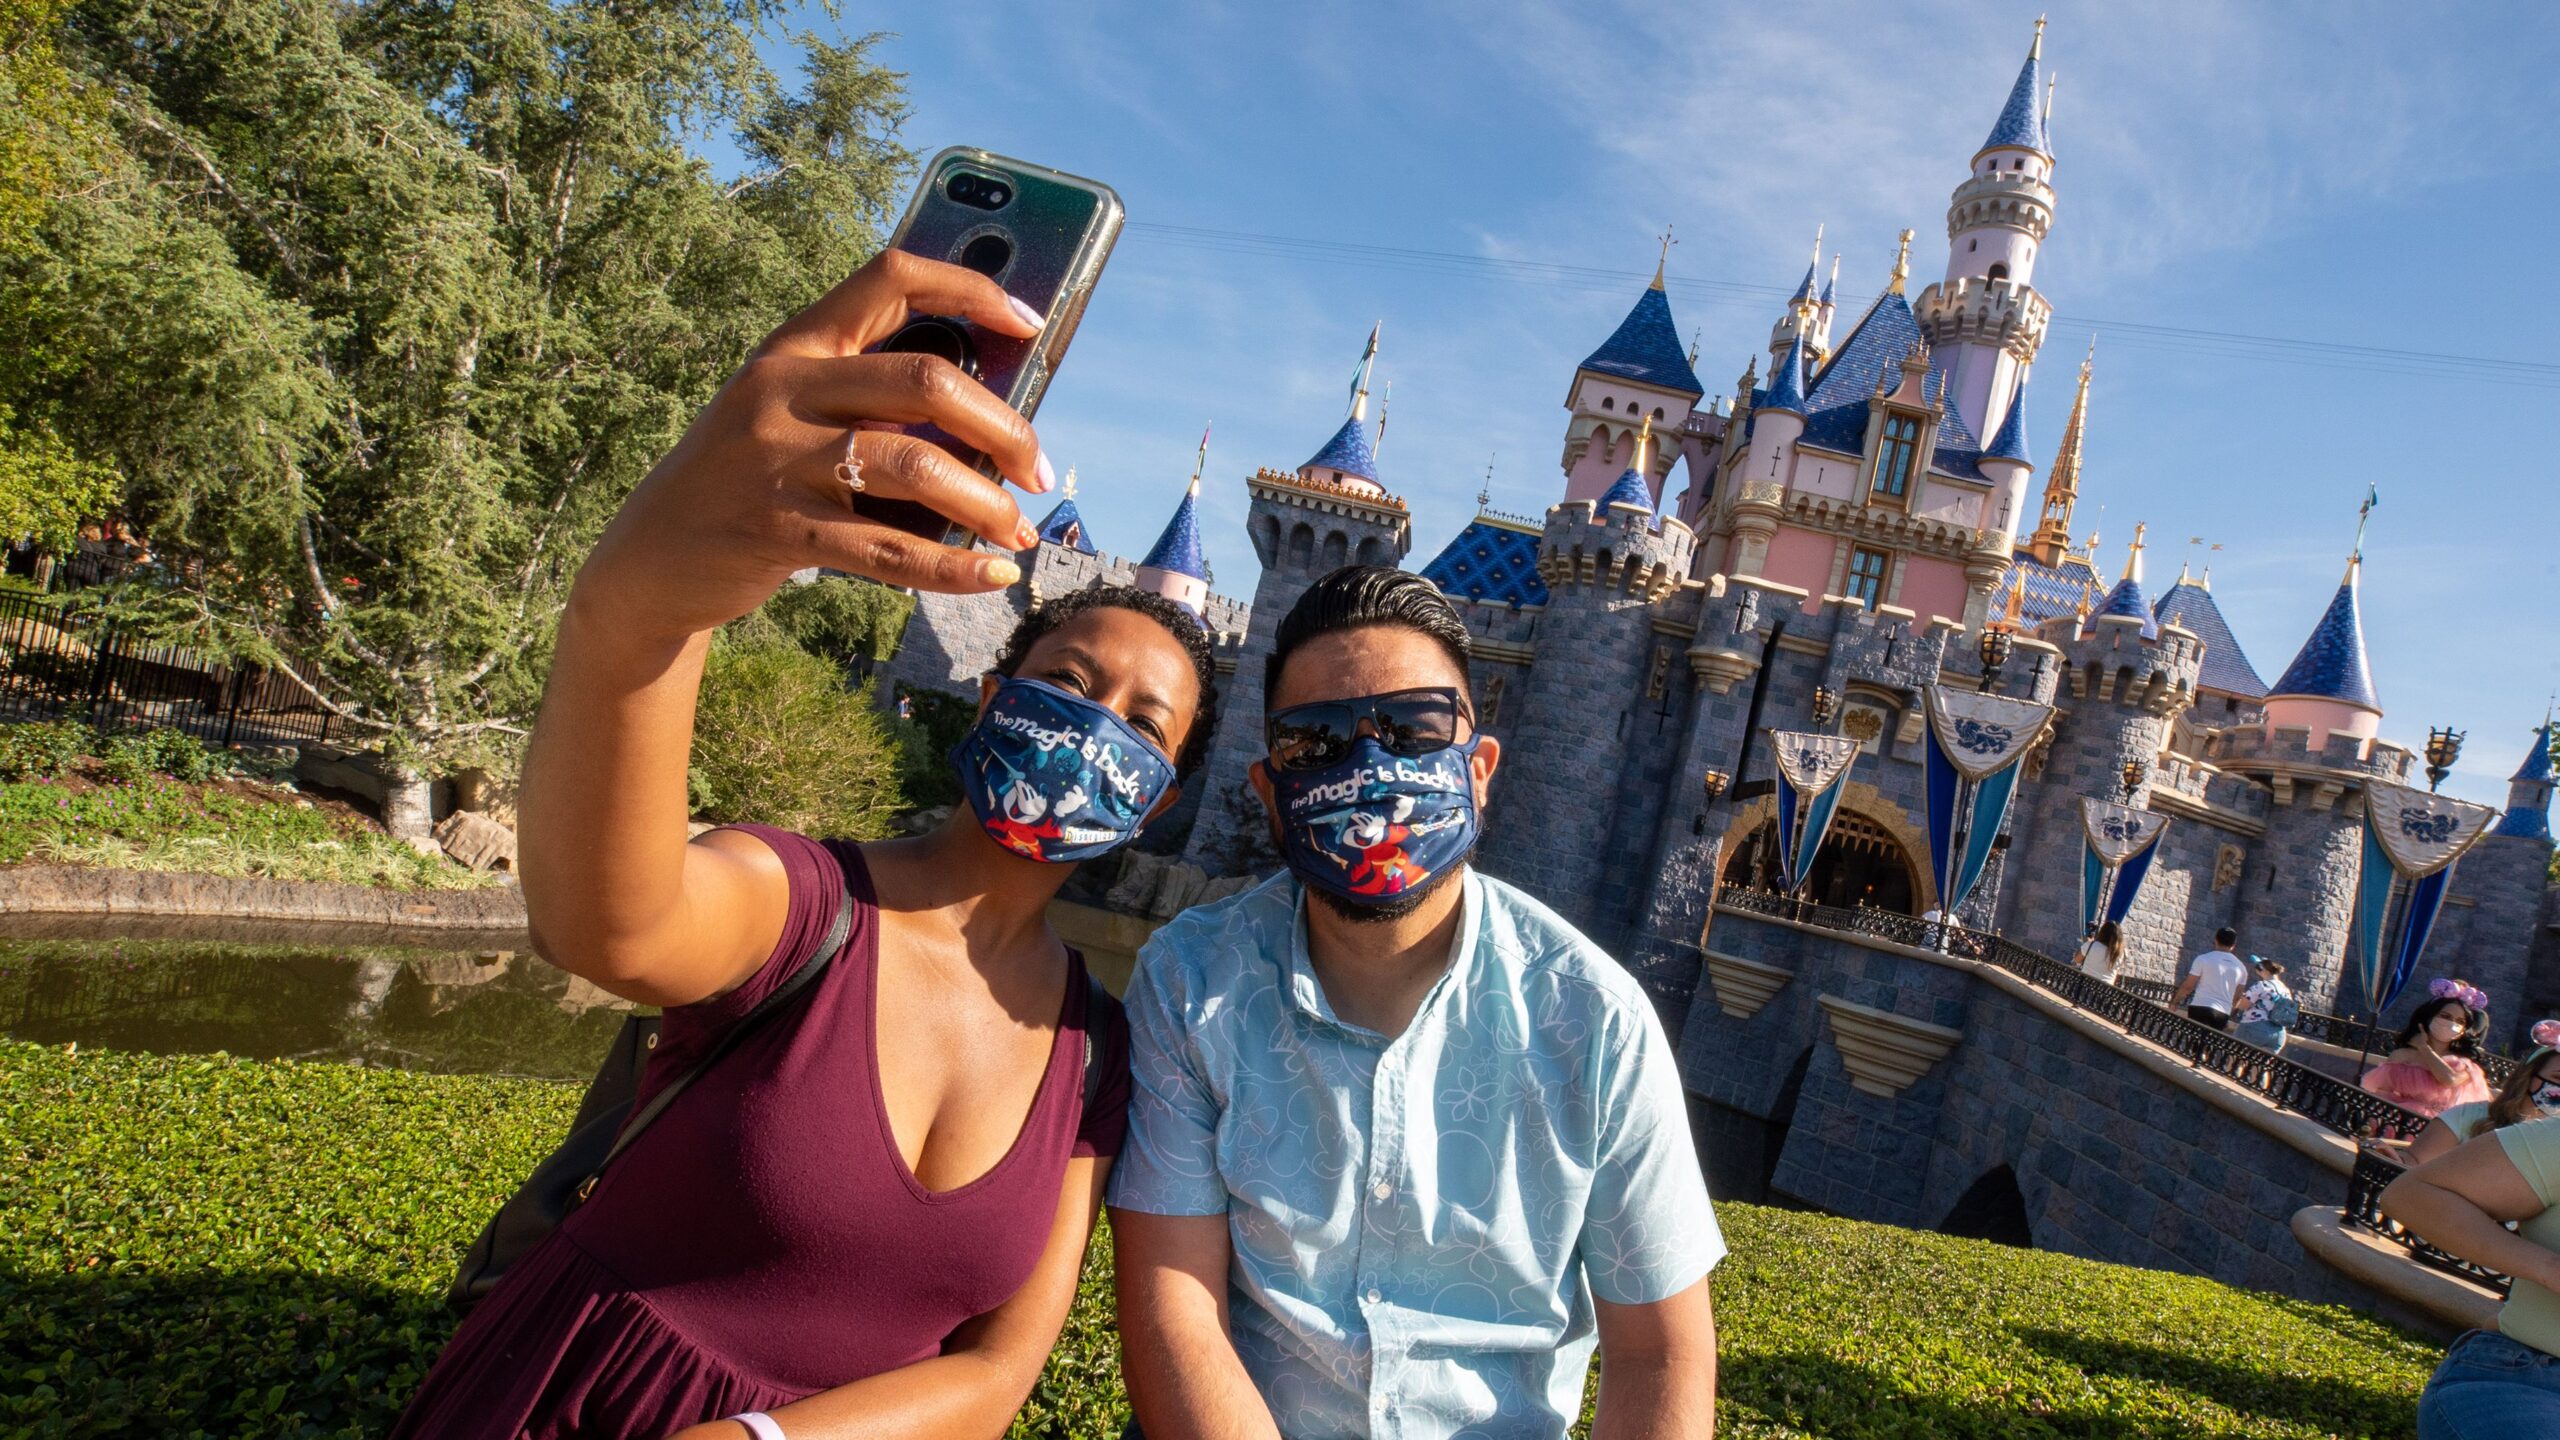 Disneyland Resort Welcomes Guests Back to this Happy Place